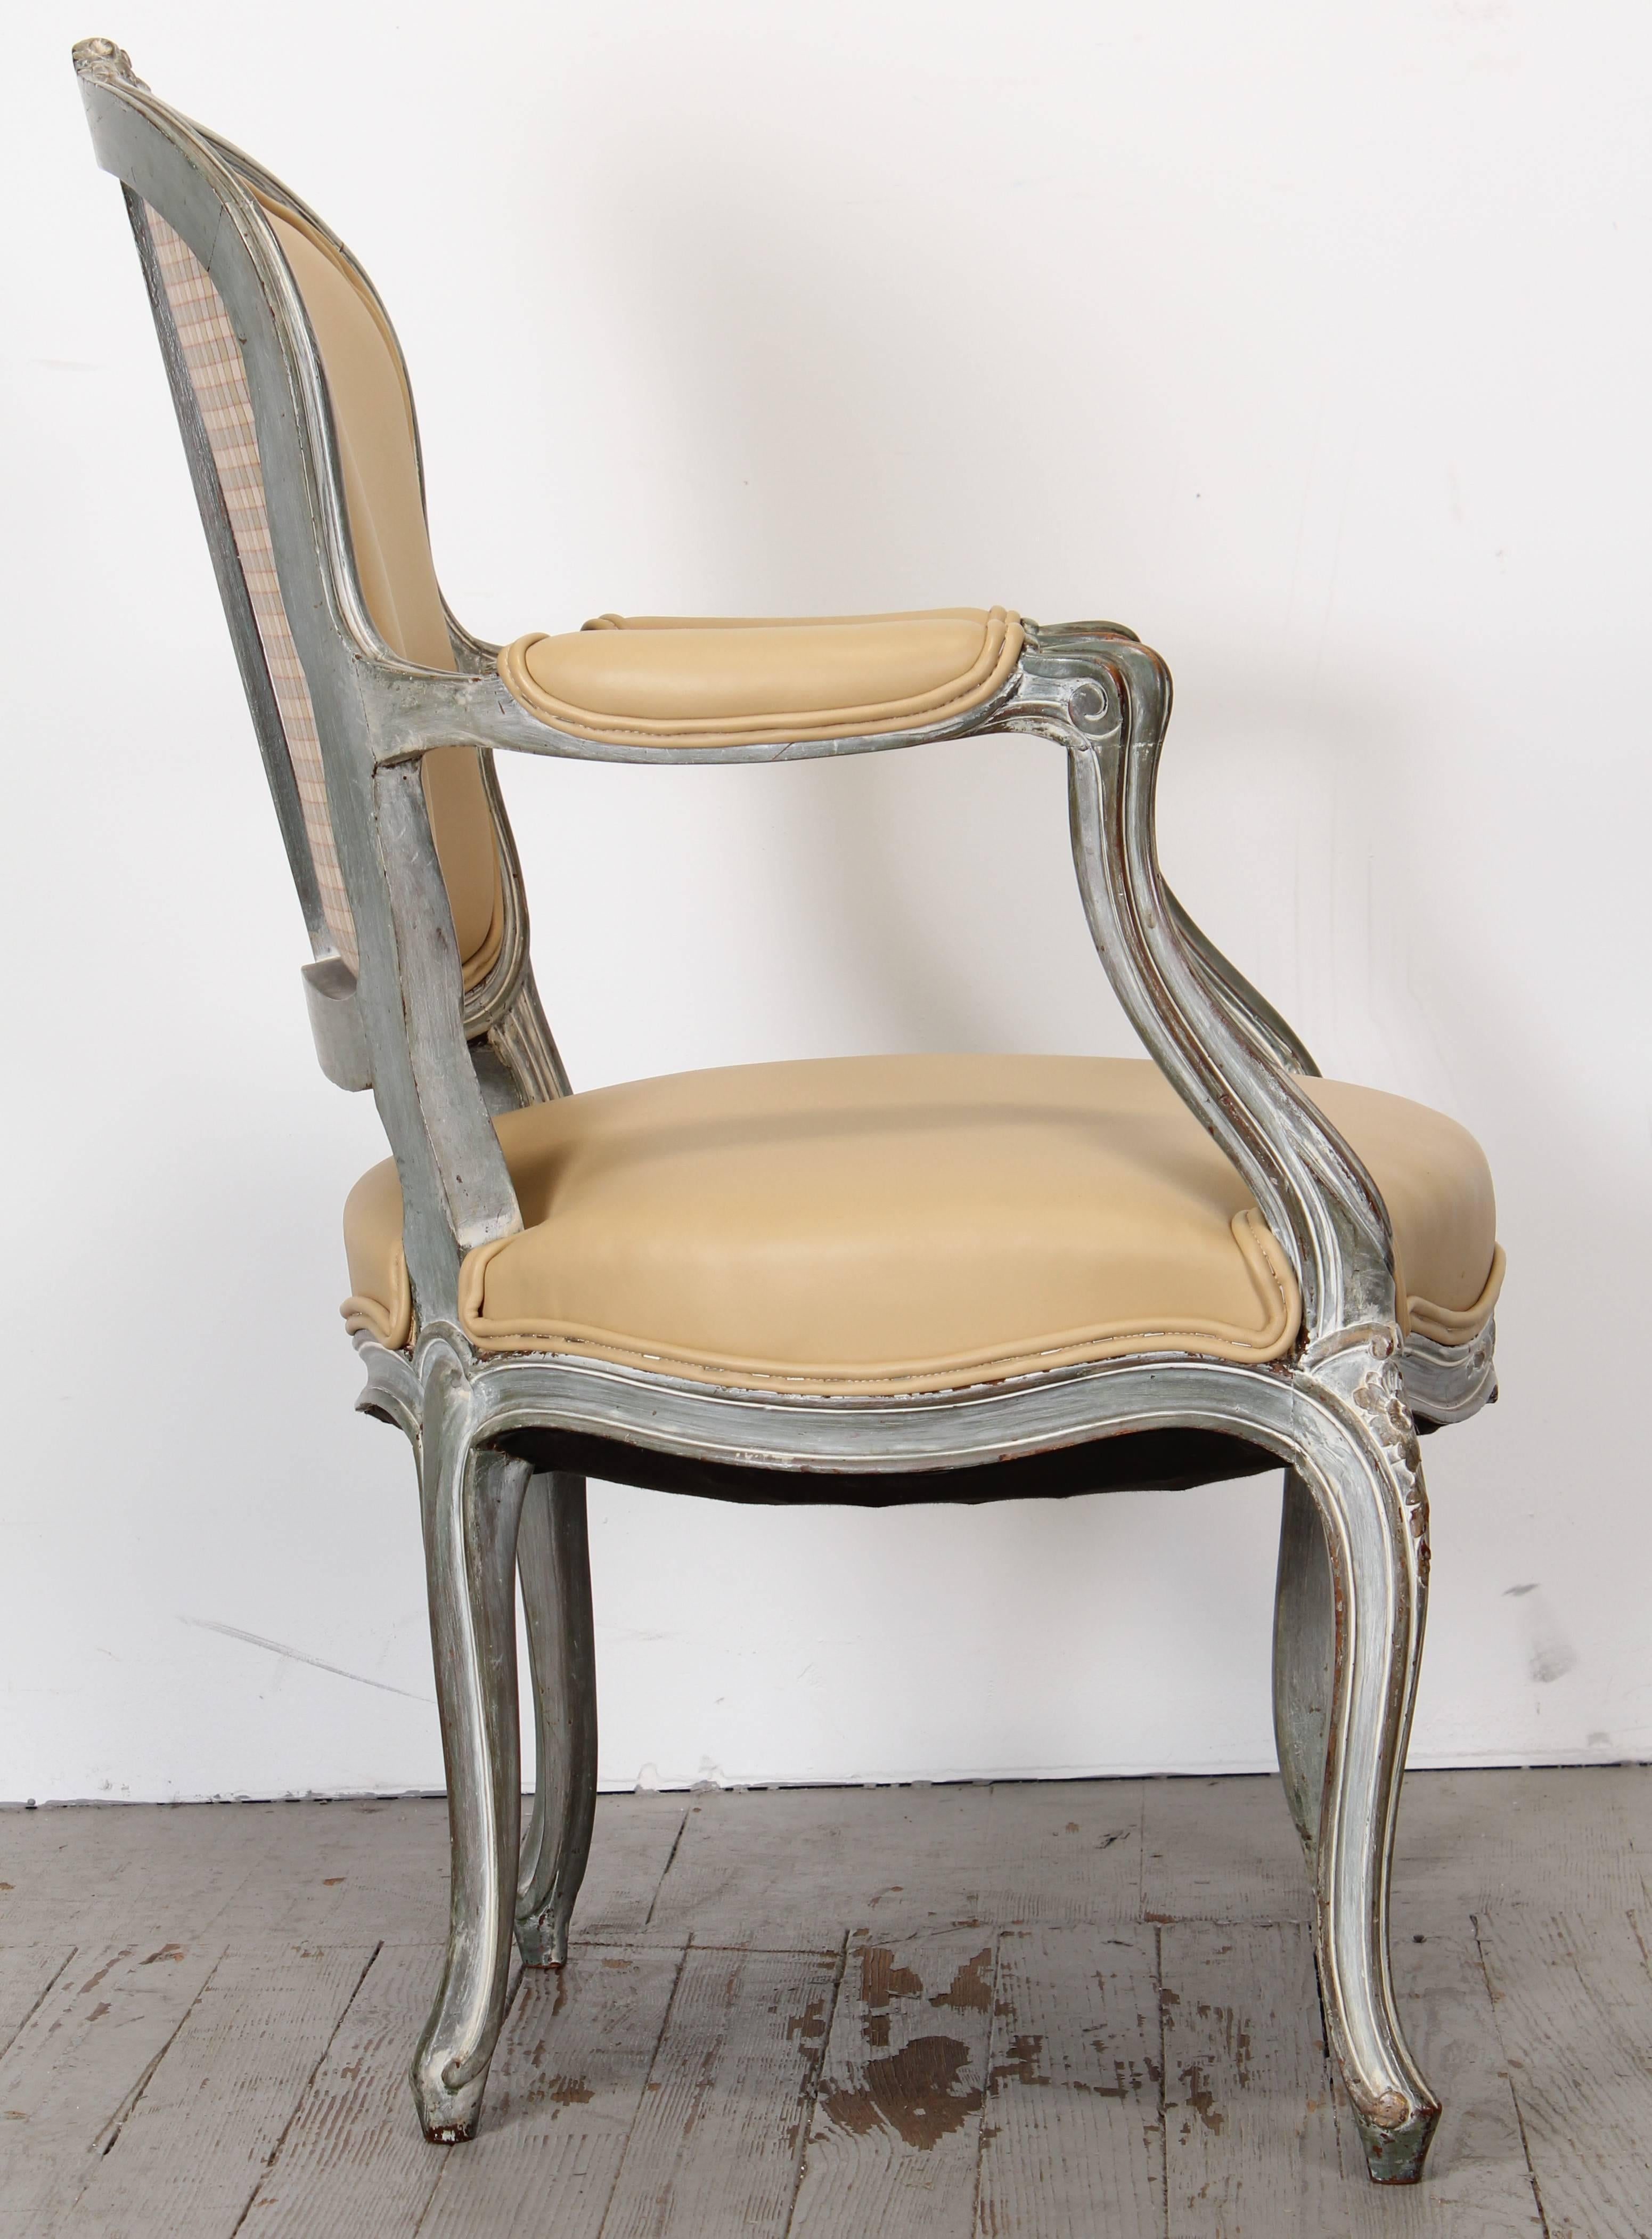 1920s chair styles